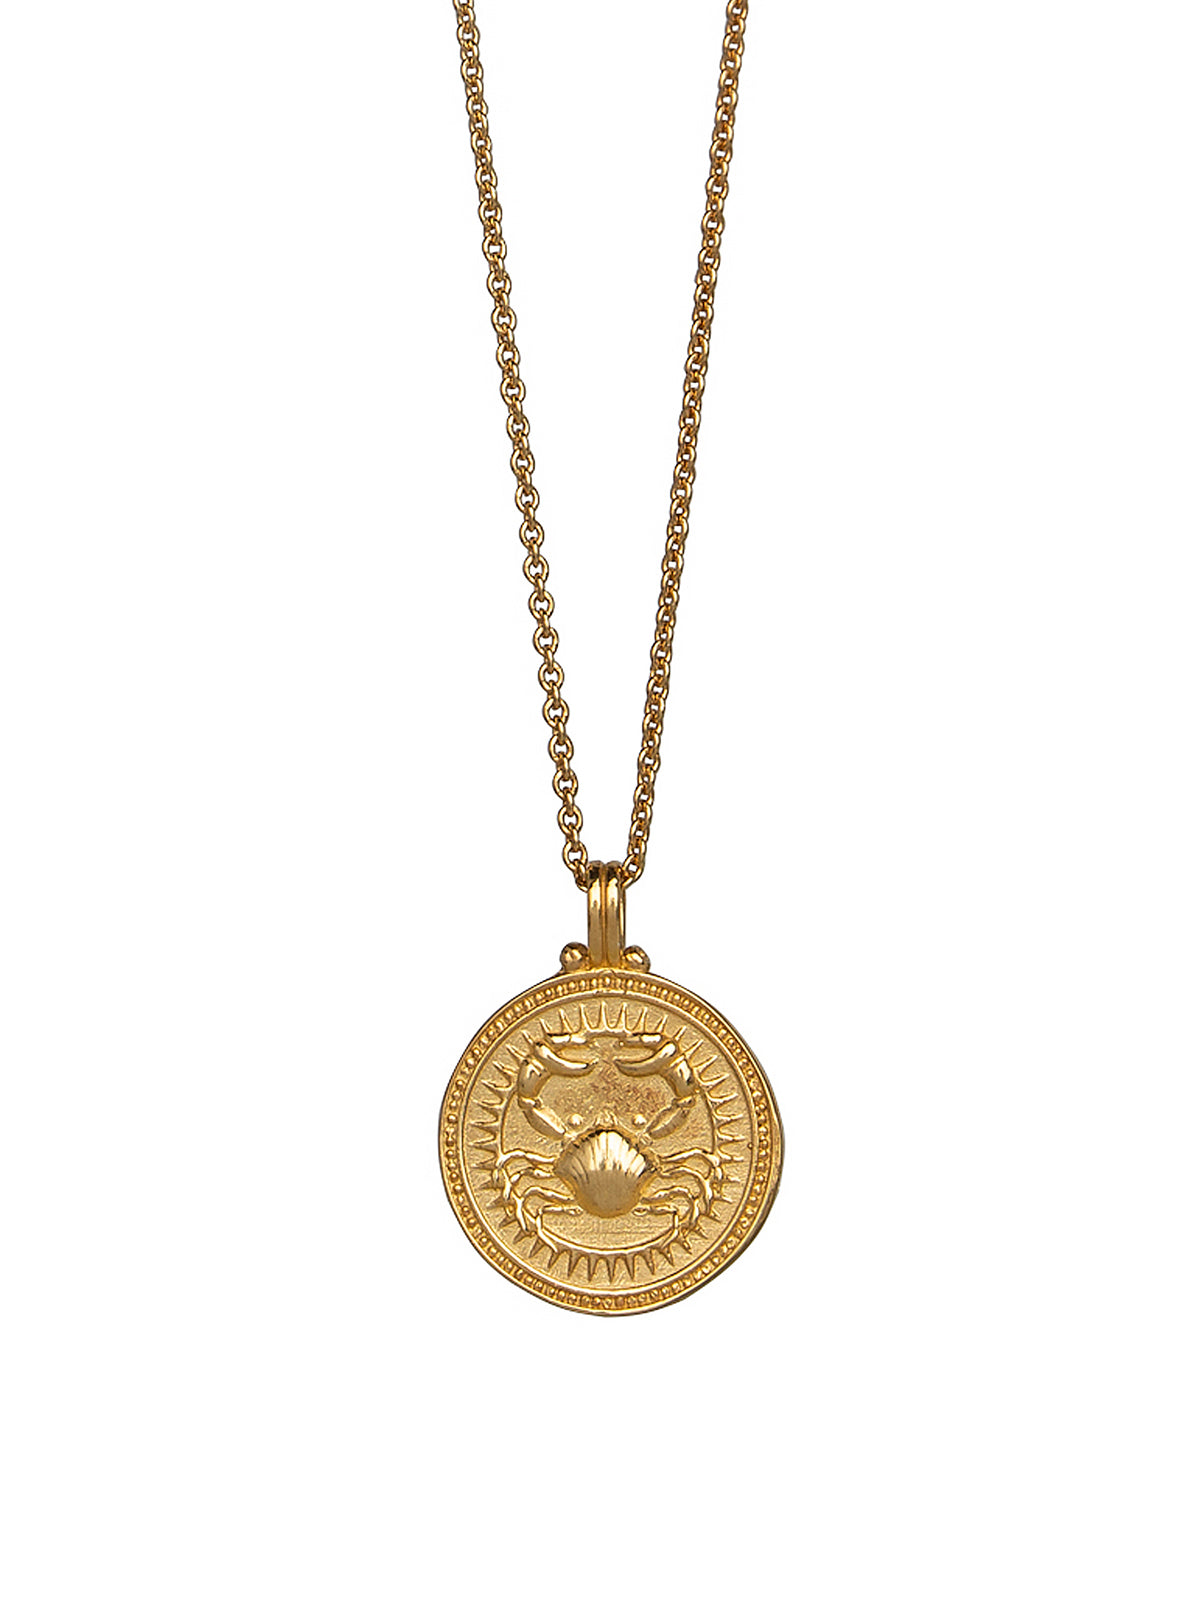 Cancer. 18ct Solid Gold Star Sign Necklace. The pendant features an Evil Eye on the back to ward off any naughty behavior aimed at you, Our logo and the 750 Hallmark for 18ct Gold.